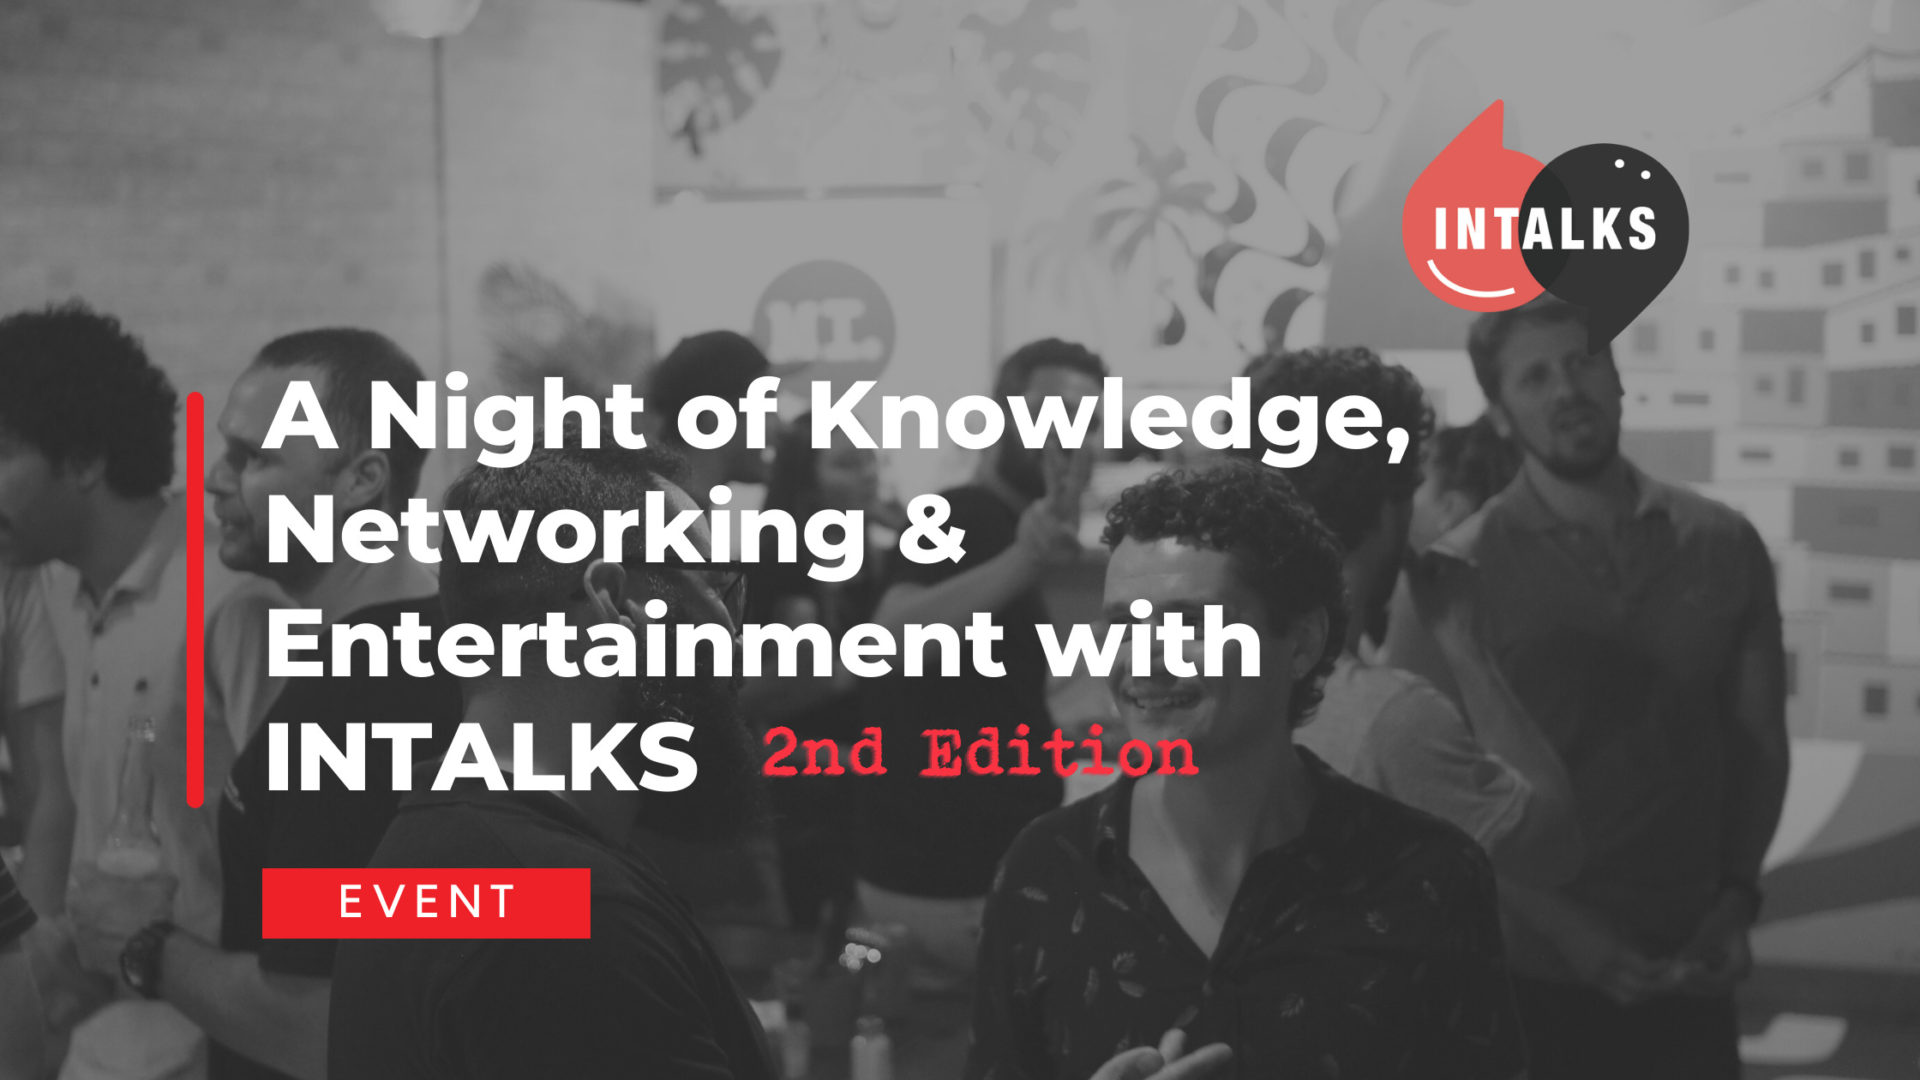 Join Us for Another Inspiring Night with INTALKS (second edition)